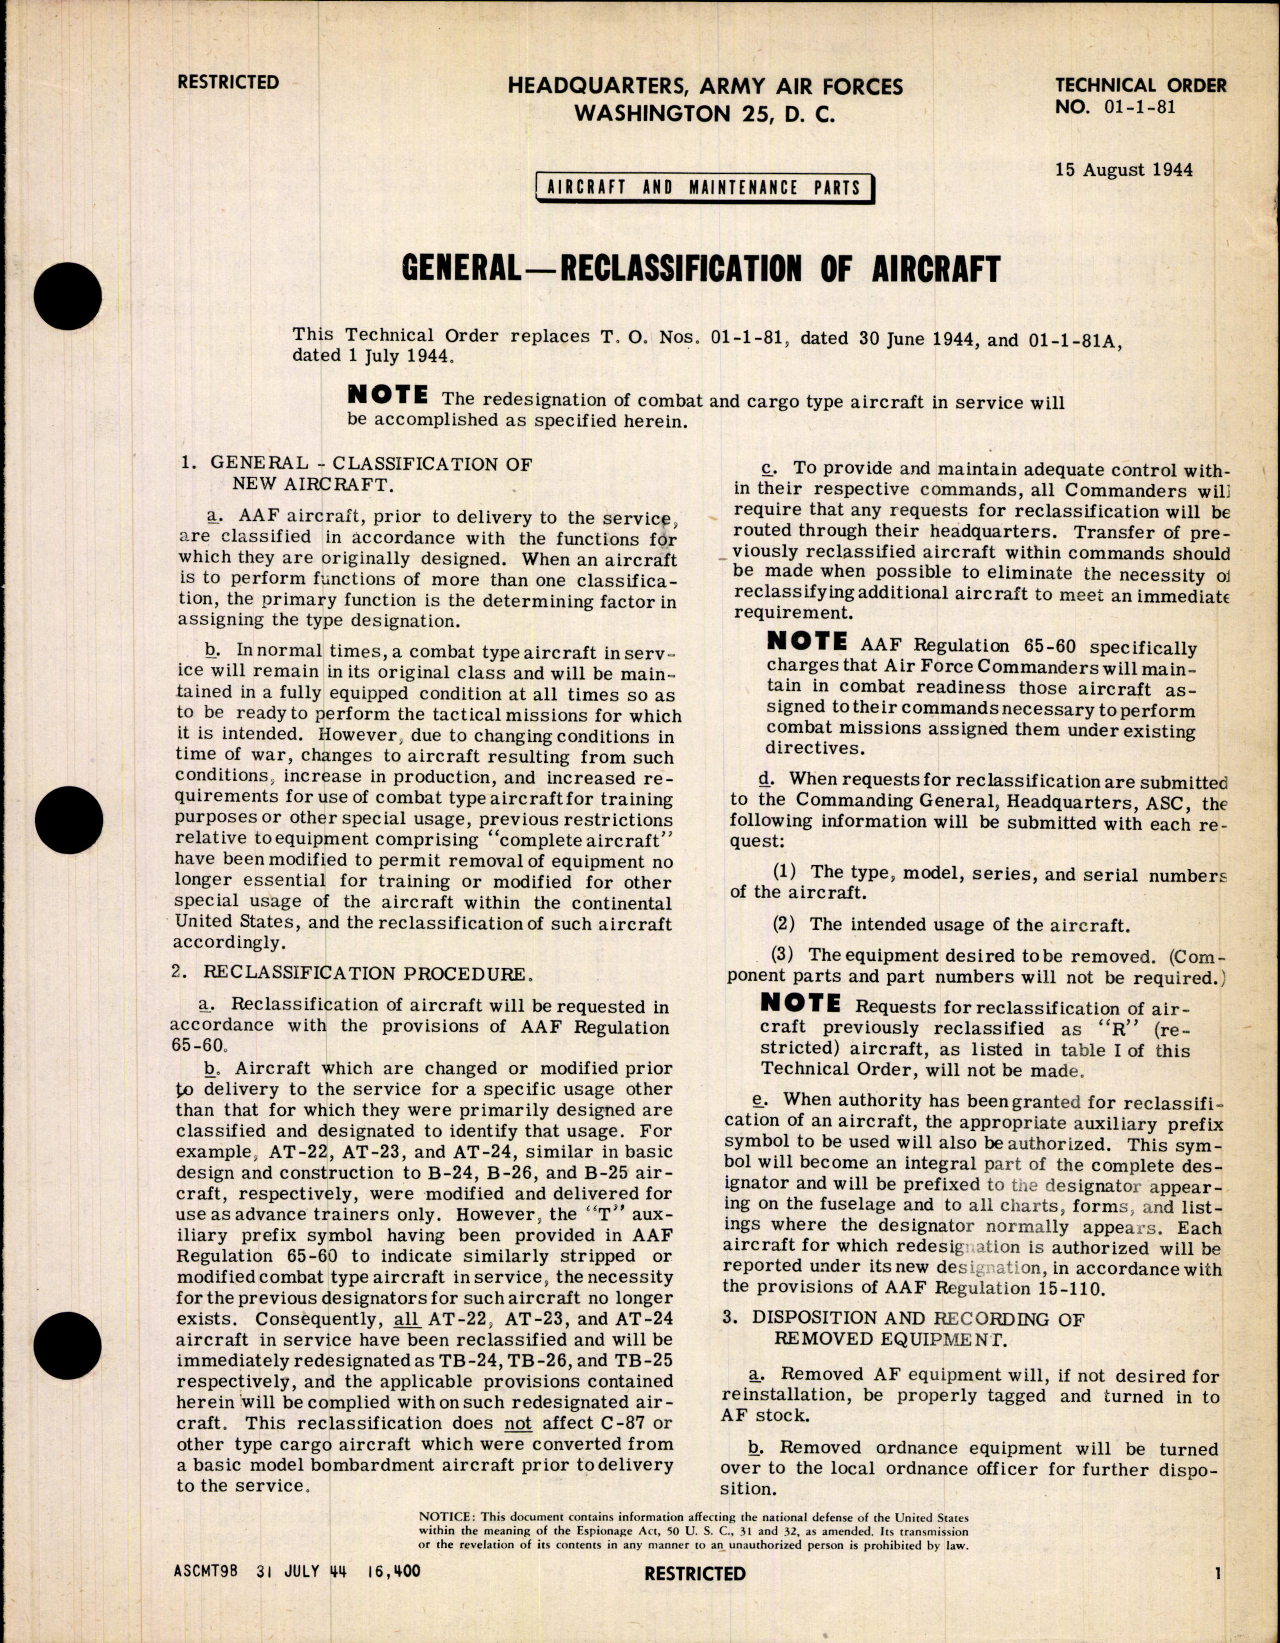 Sample page 1 from AirCorps Library document: Aircraft and Maintenance Parts; Reclassification of Aircraft